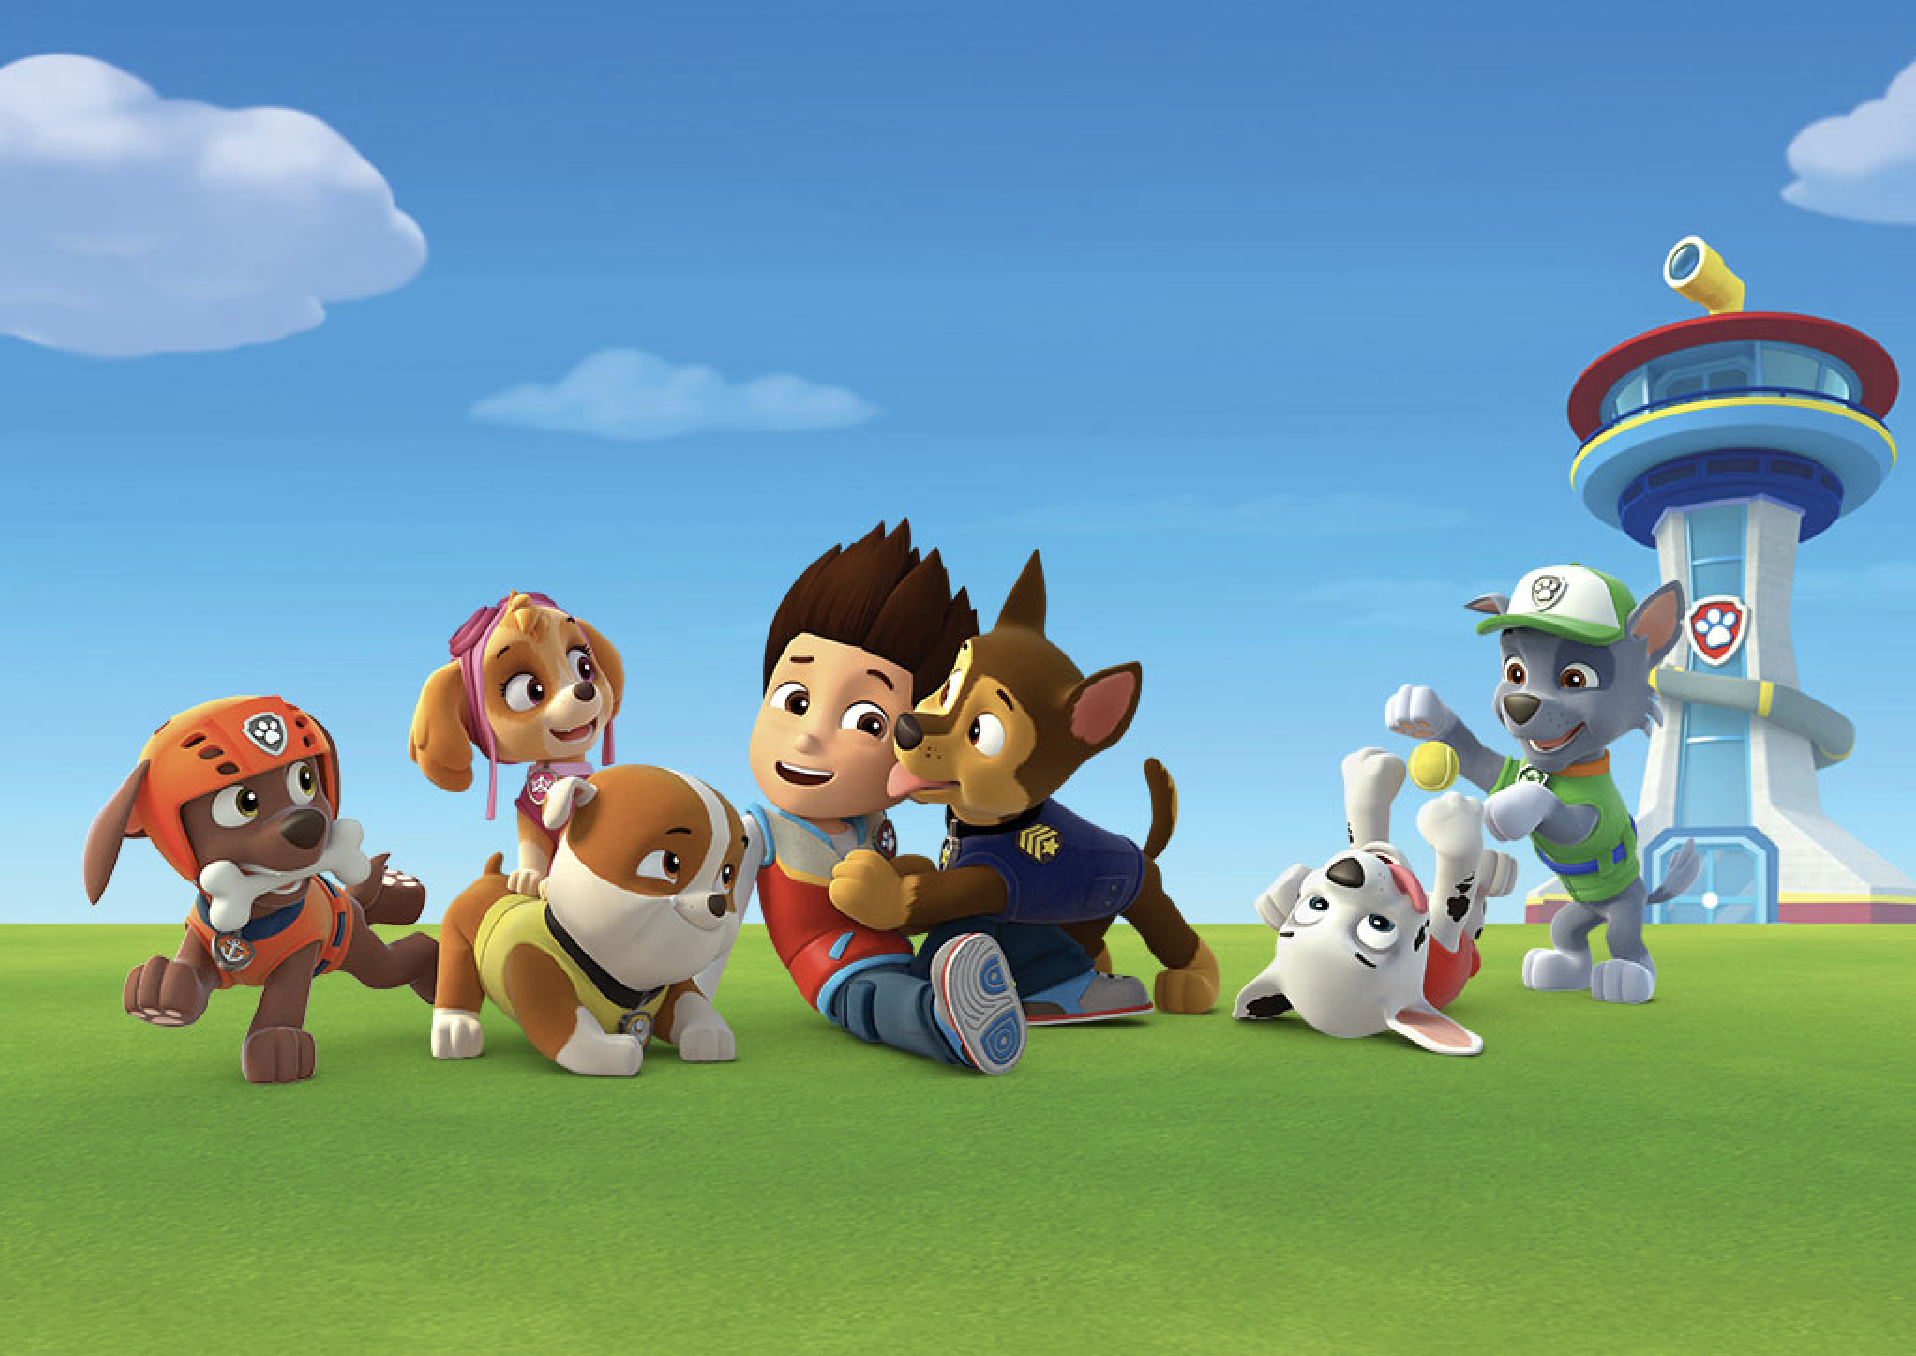 ‘PAW Patrol’ Movie In The Works For Summer 2021 From Spin Master